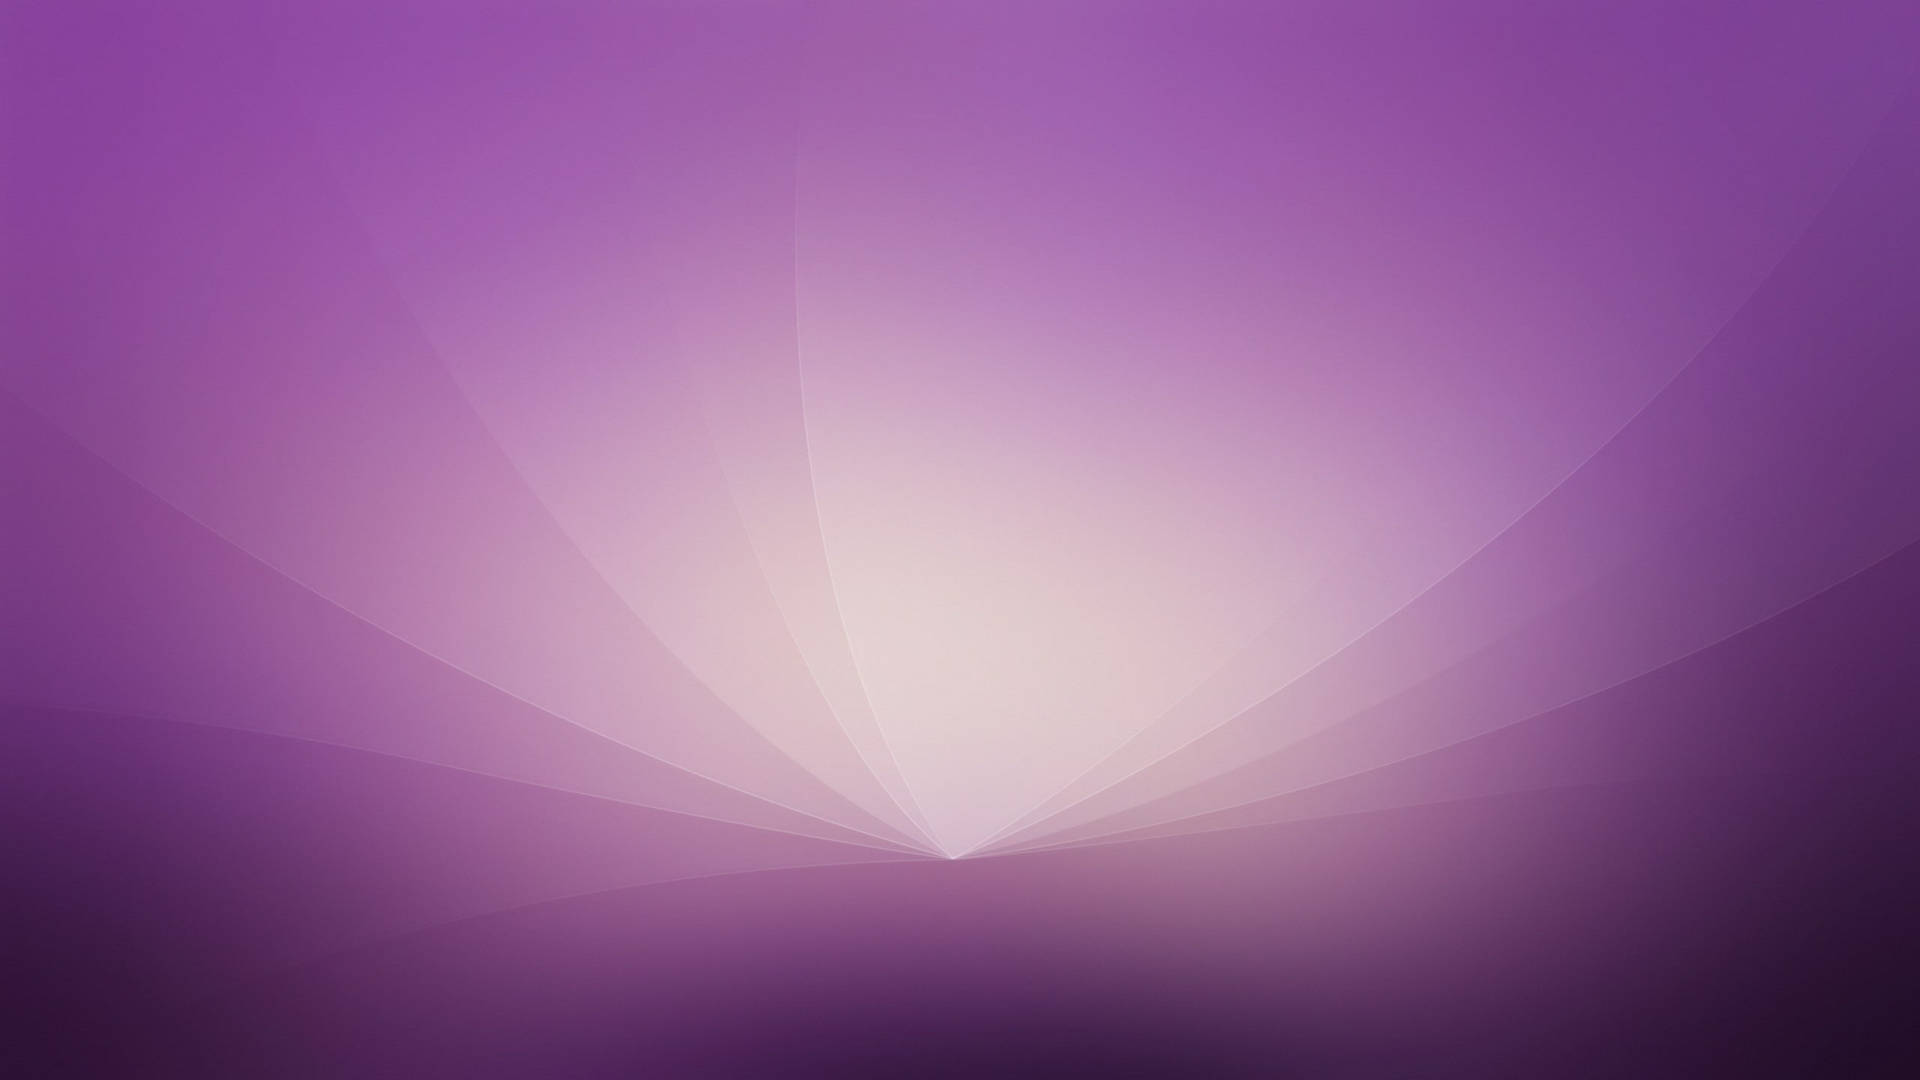 Download Violet Aesthetic Simple Clean Abstract Wallpaper